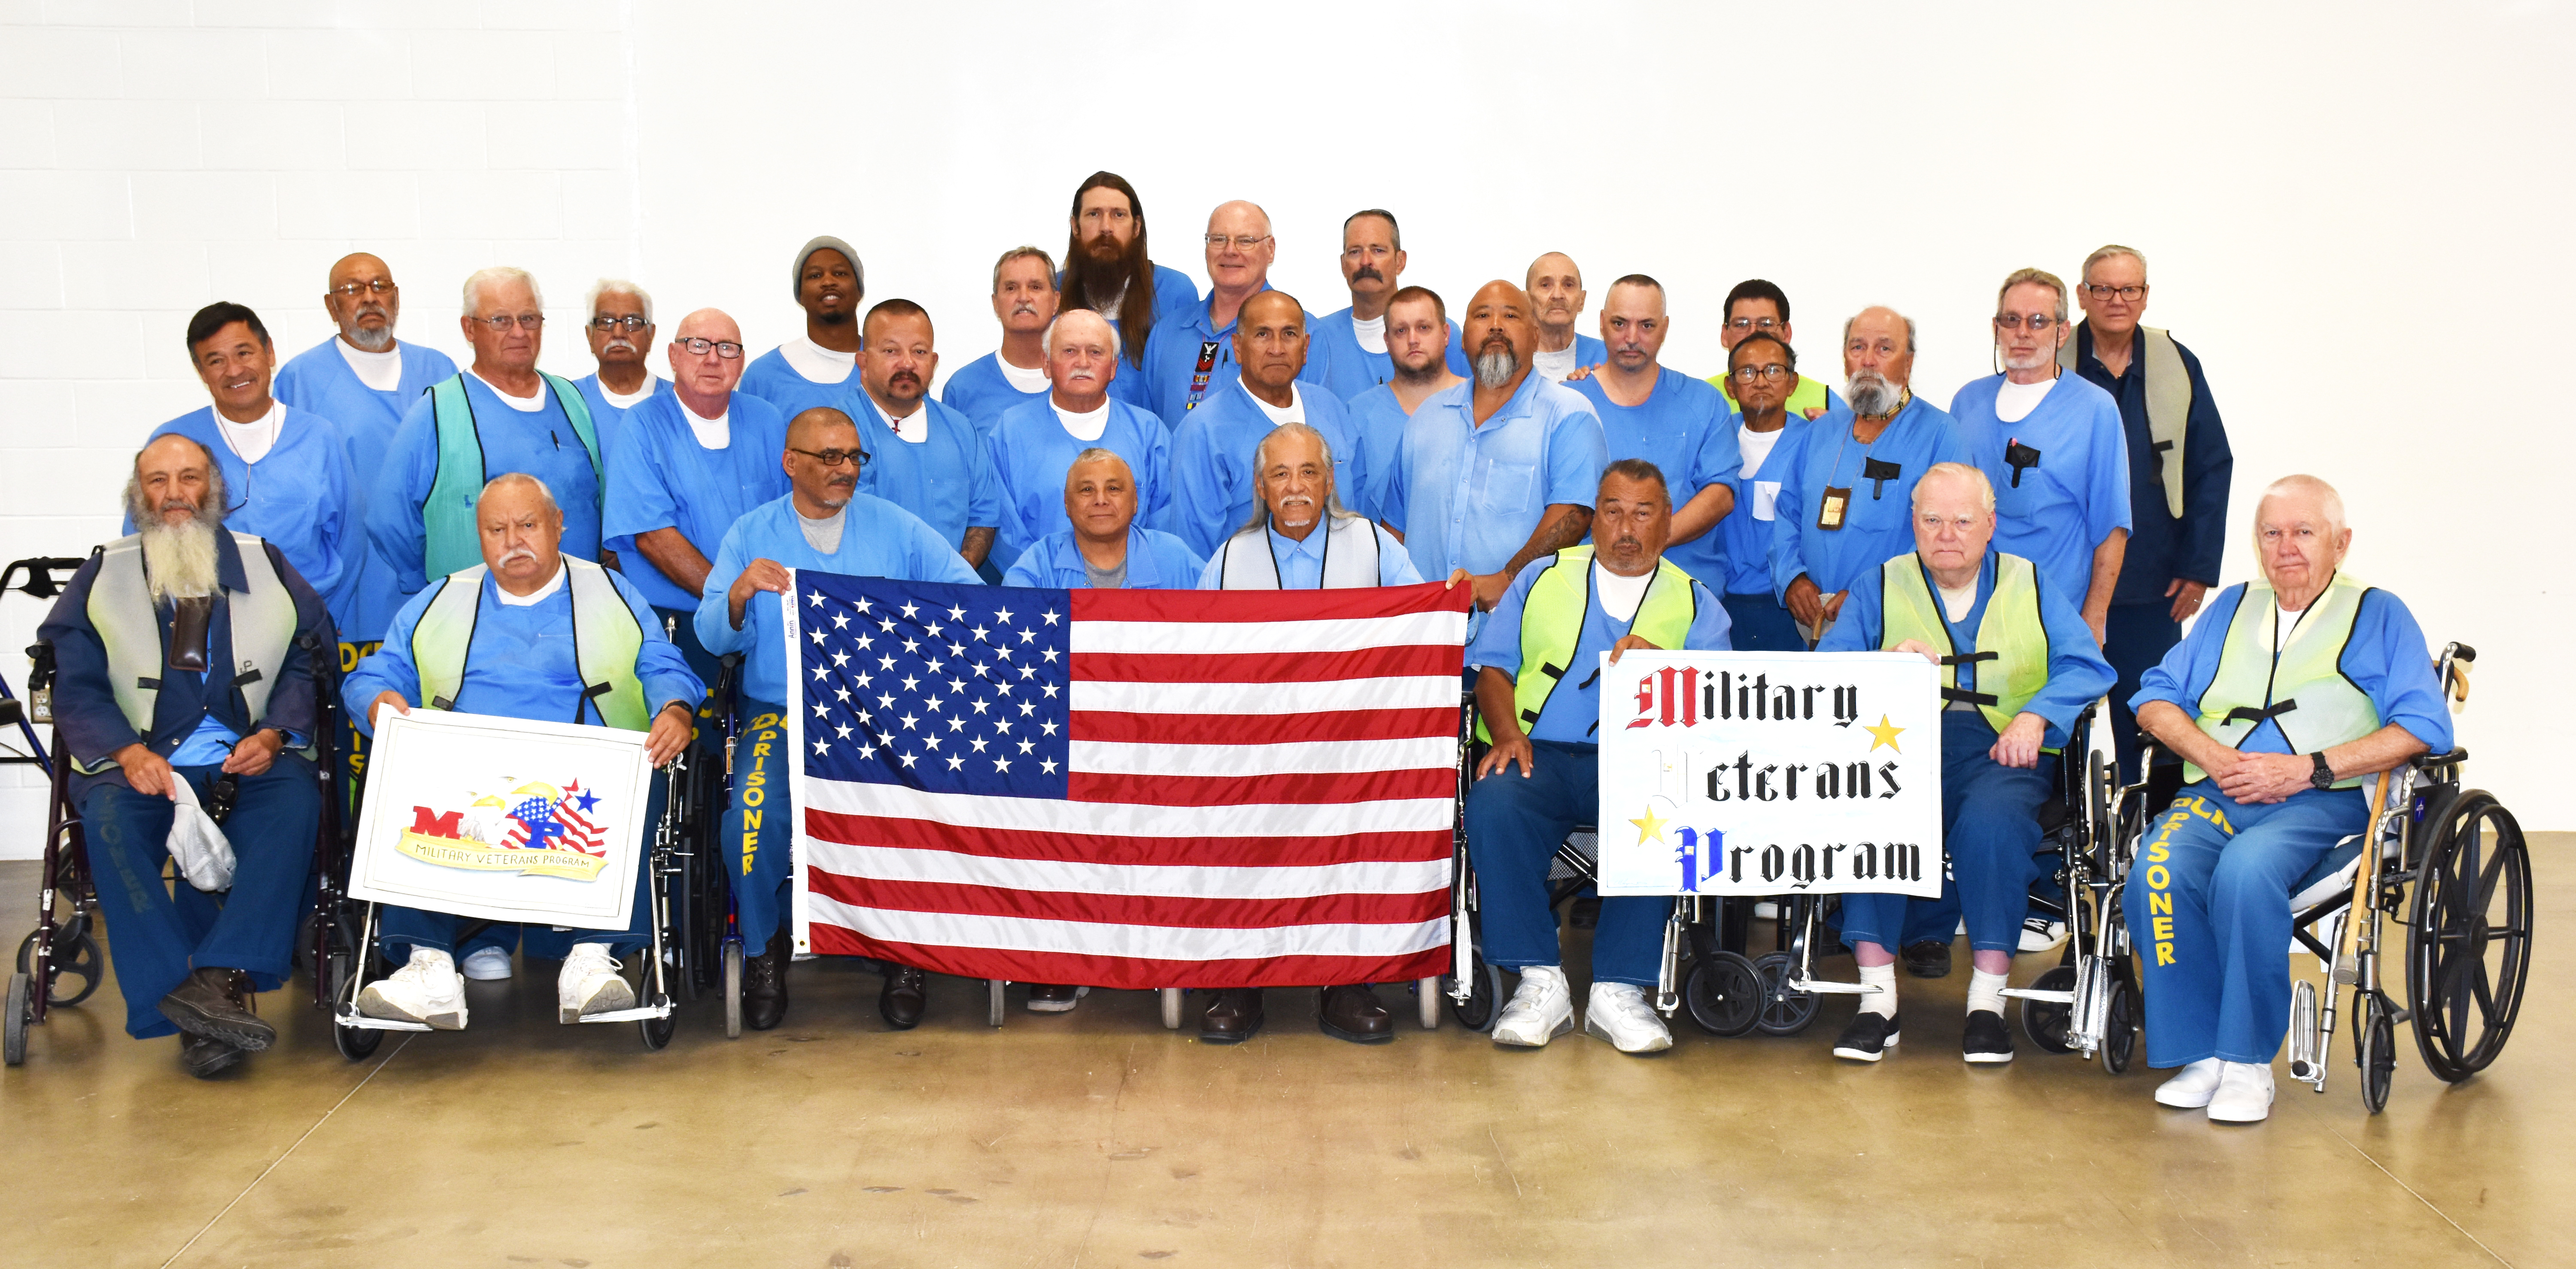 Inmates in blue shirts hold a U.S. flag.